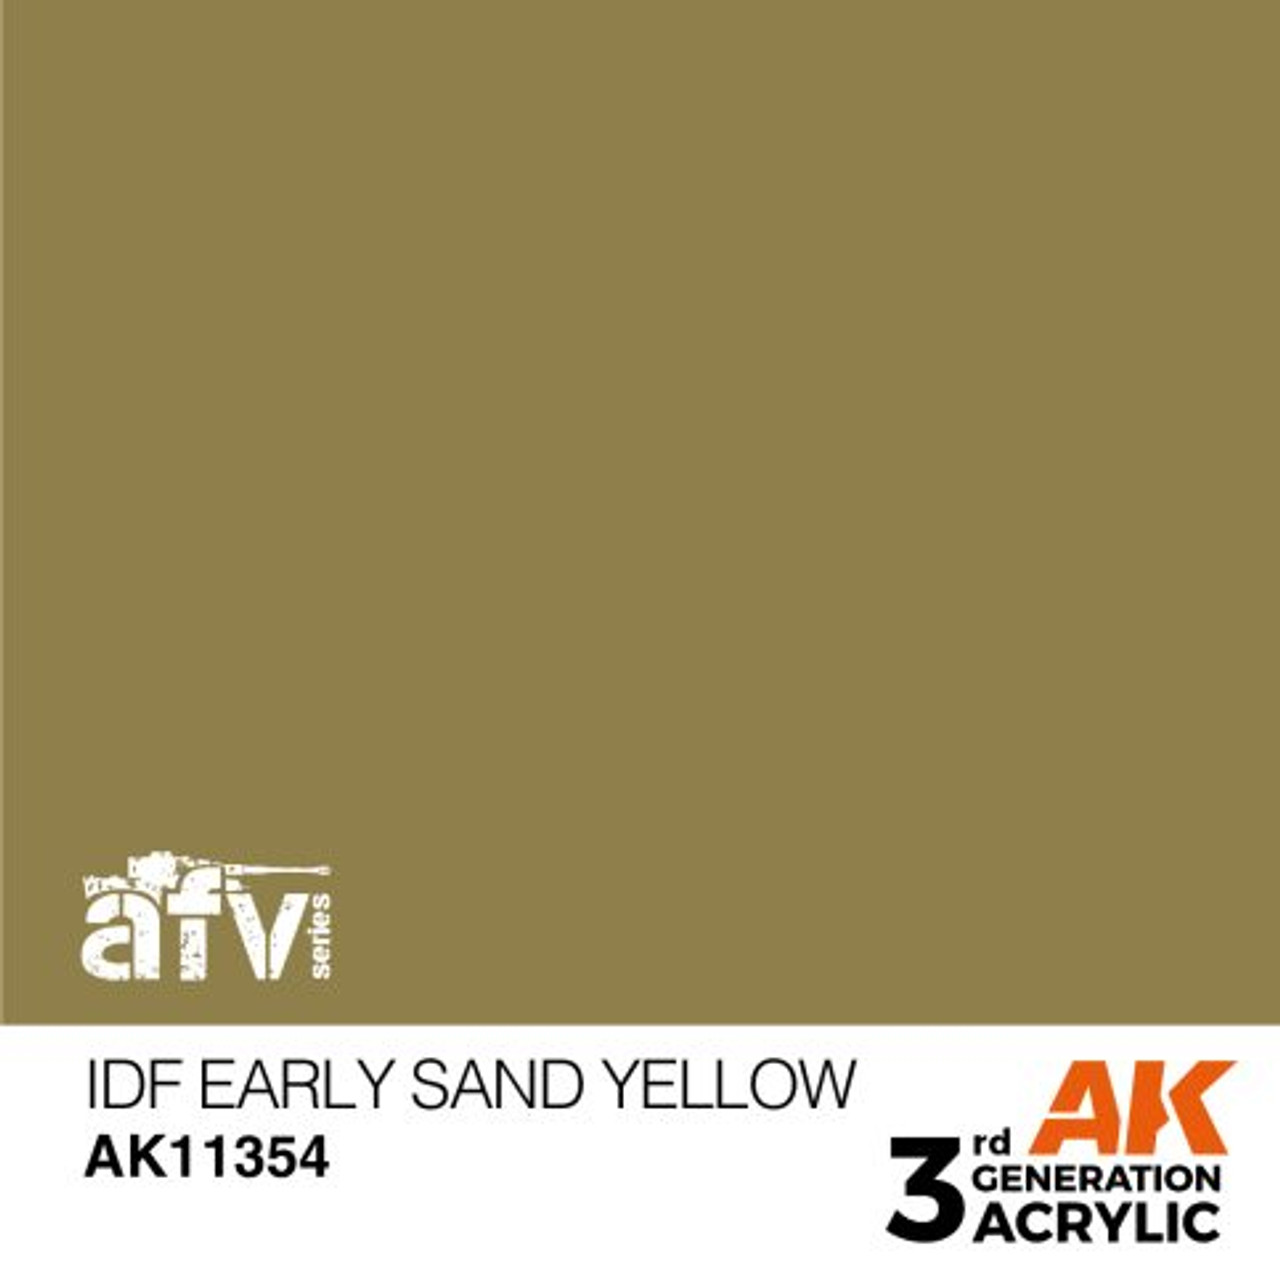 3G AFV 354 - IDF Early Sand Yellow